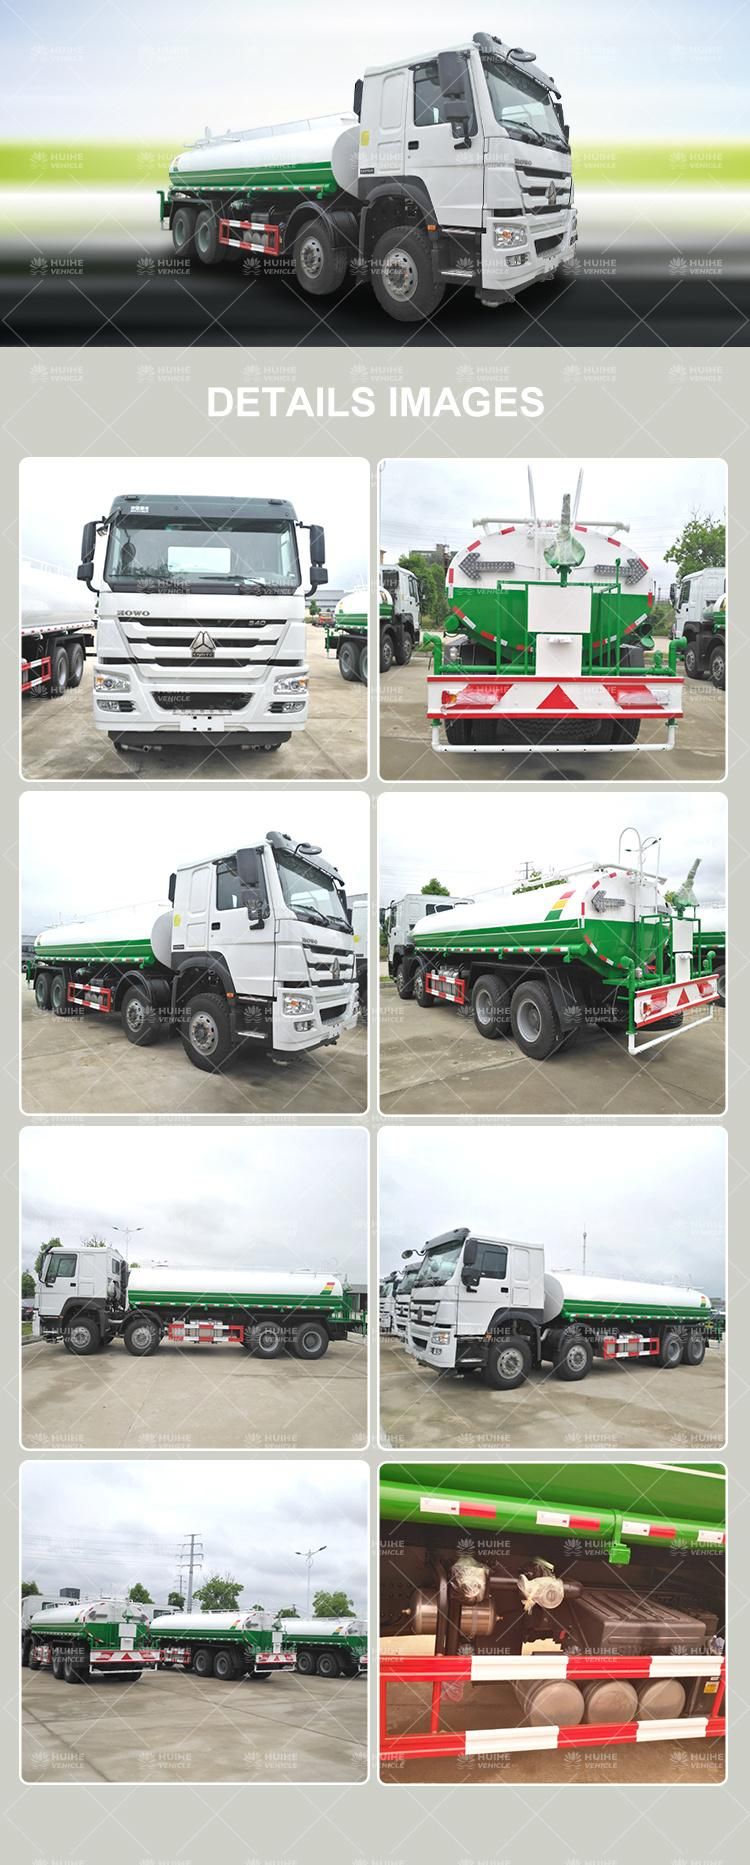 Used Sinotruk HOWO 10m3 10000liters Second Hand Water Tranker Truck Transport Truck for Sales